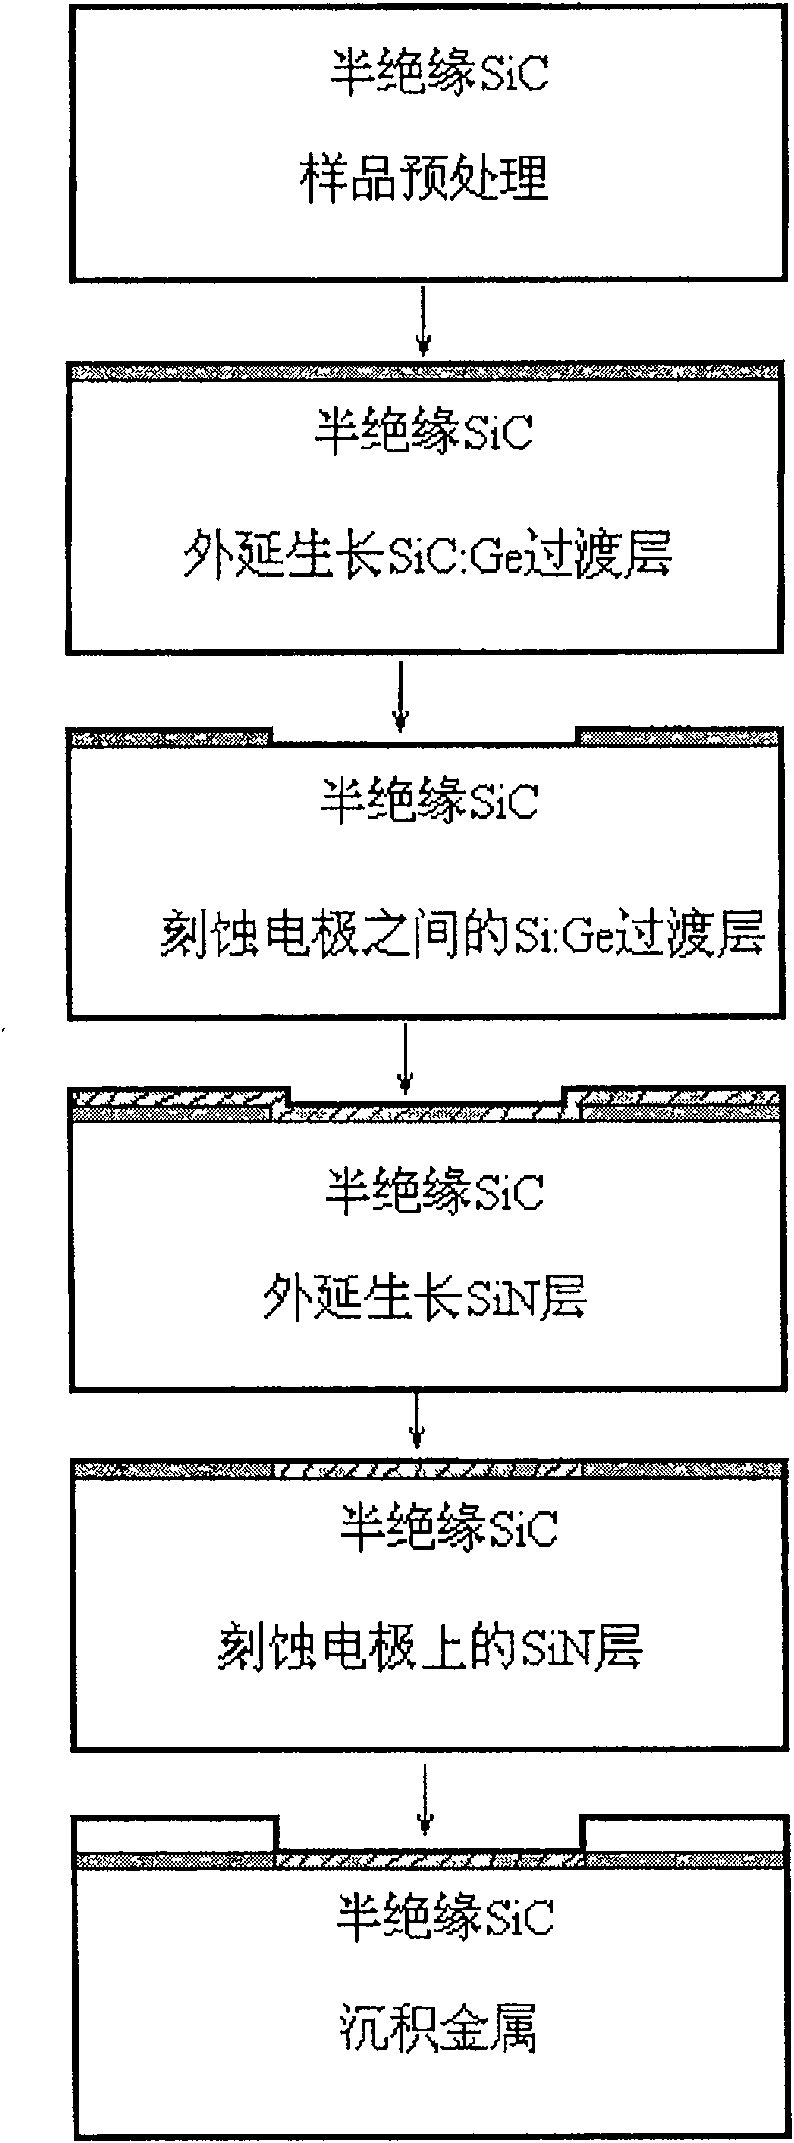 Ohm contact production method of semi-insulation SiC semiconductor device